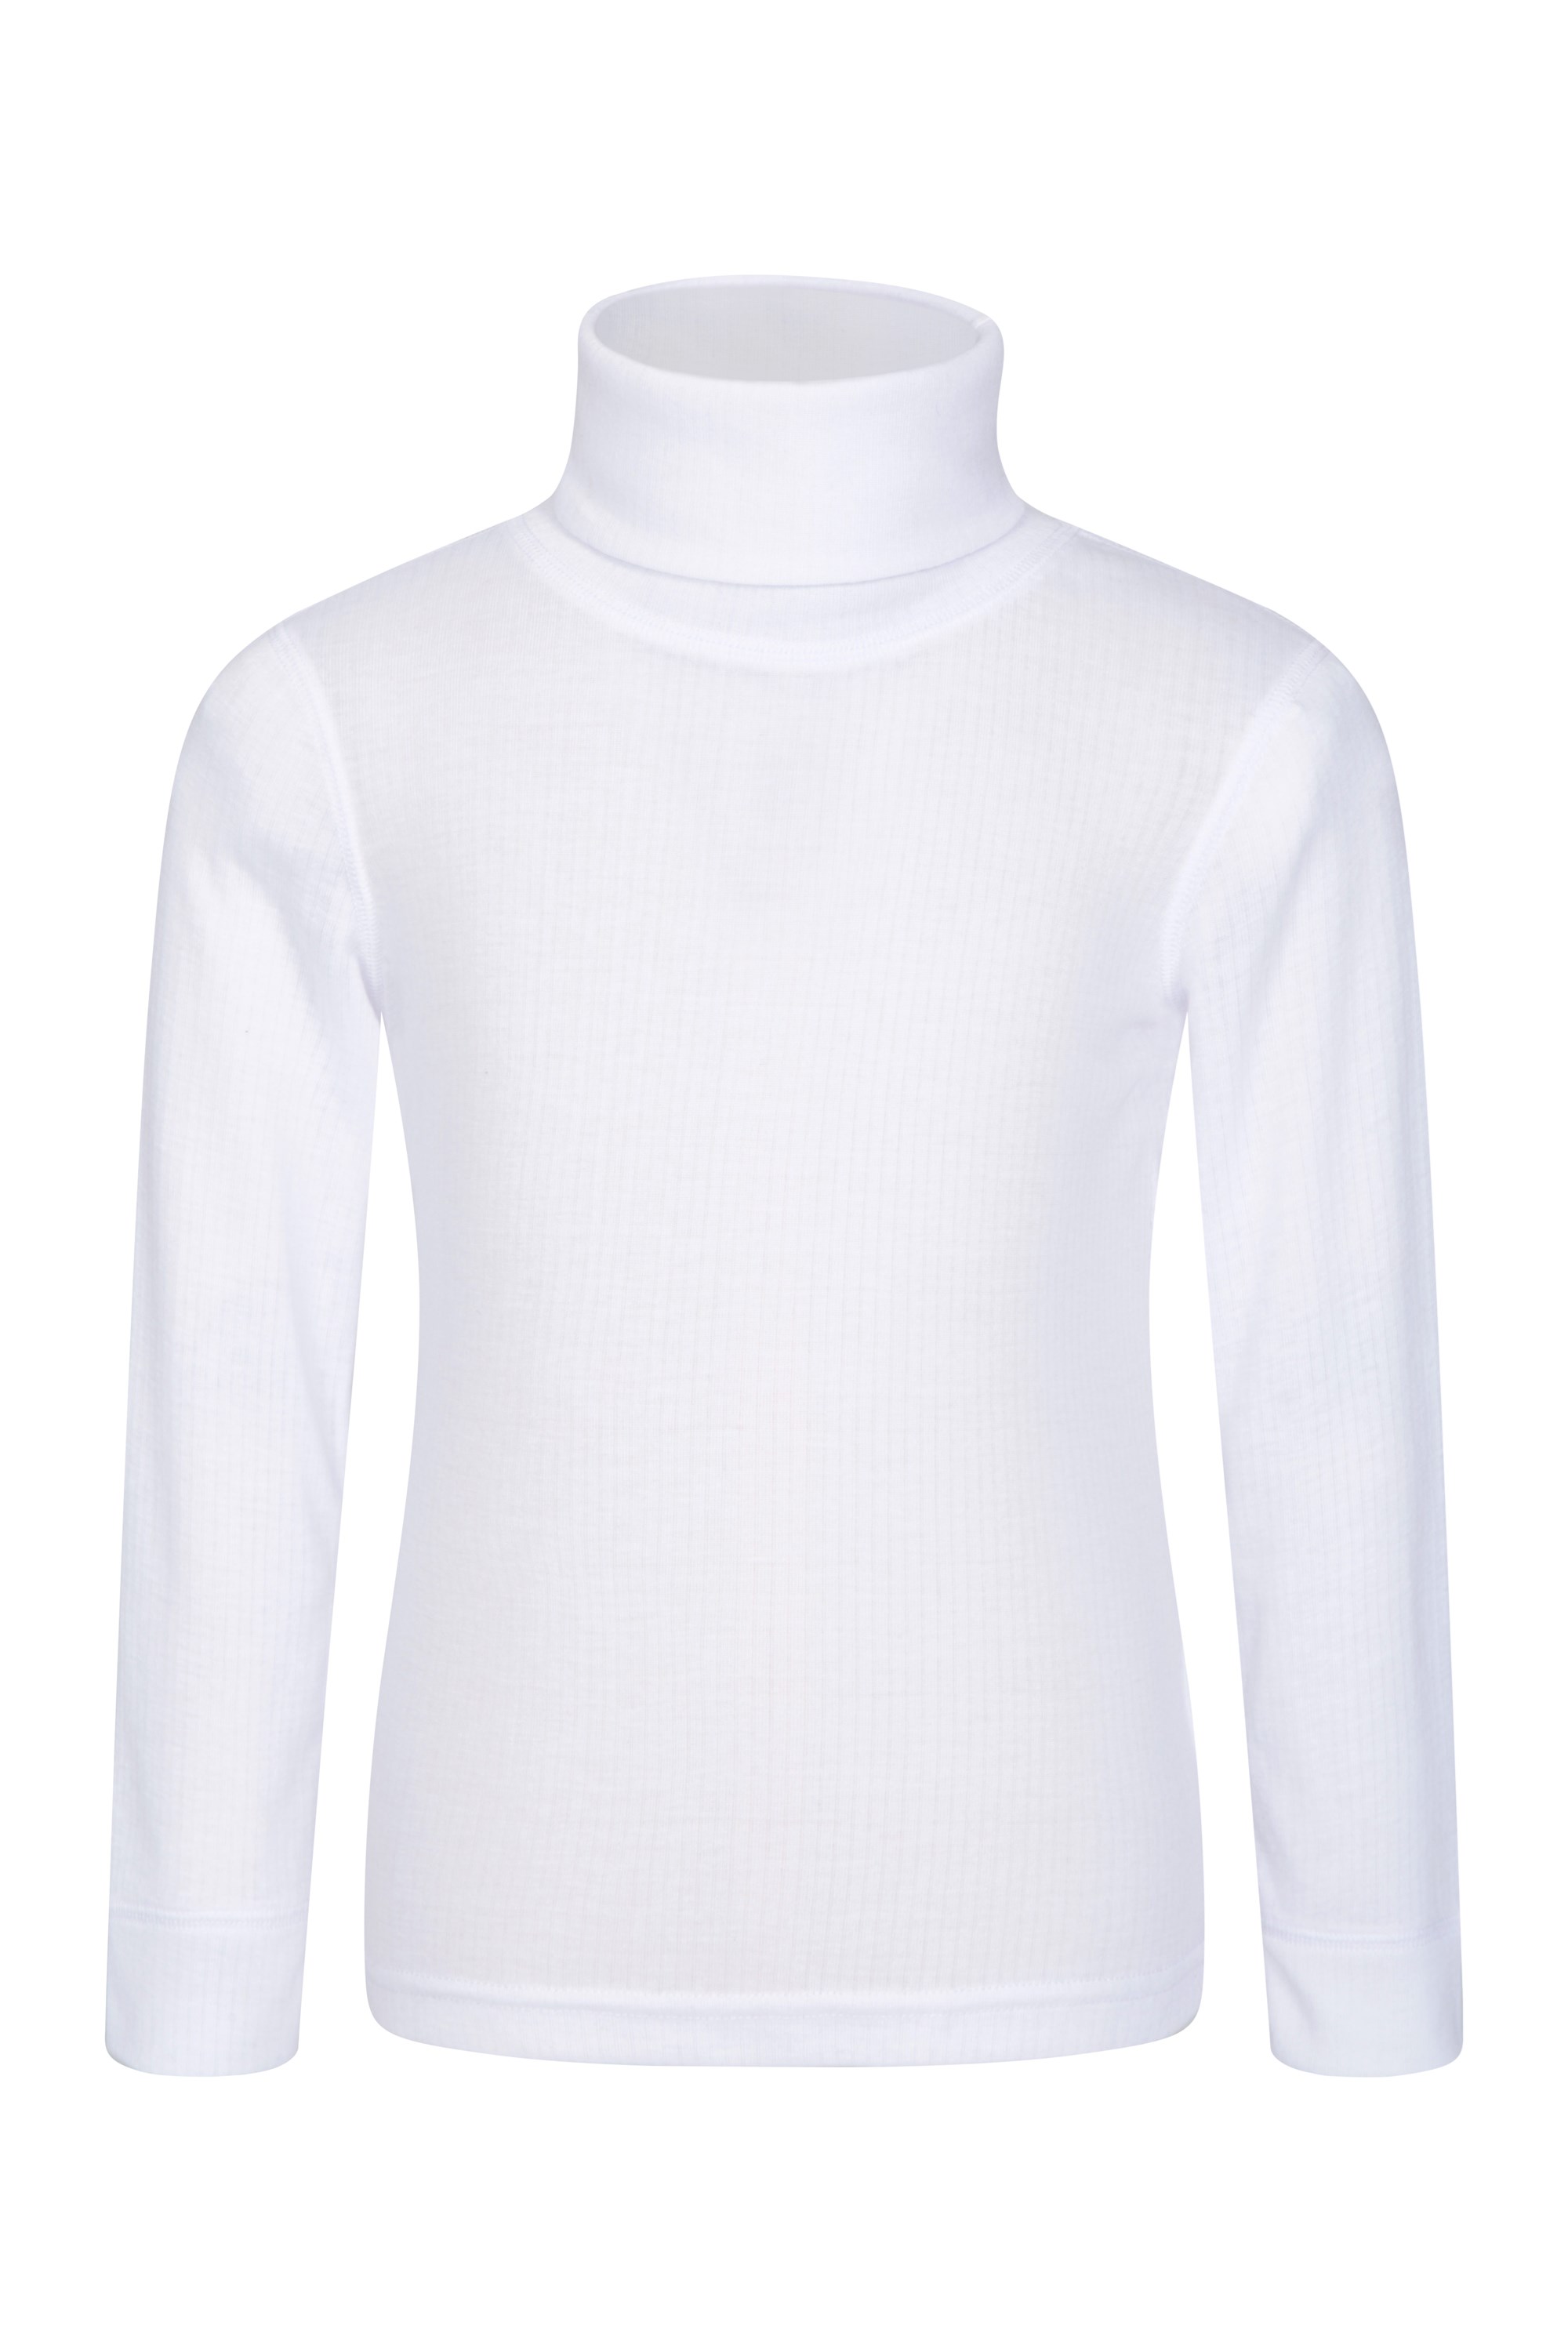 Talus Kids Roll Neck Top - White